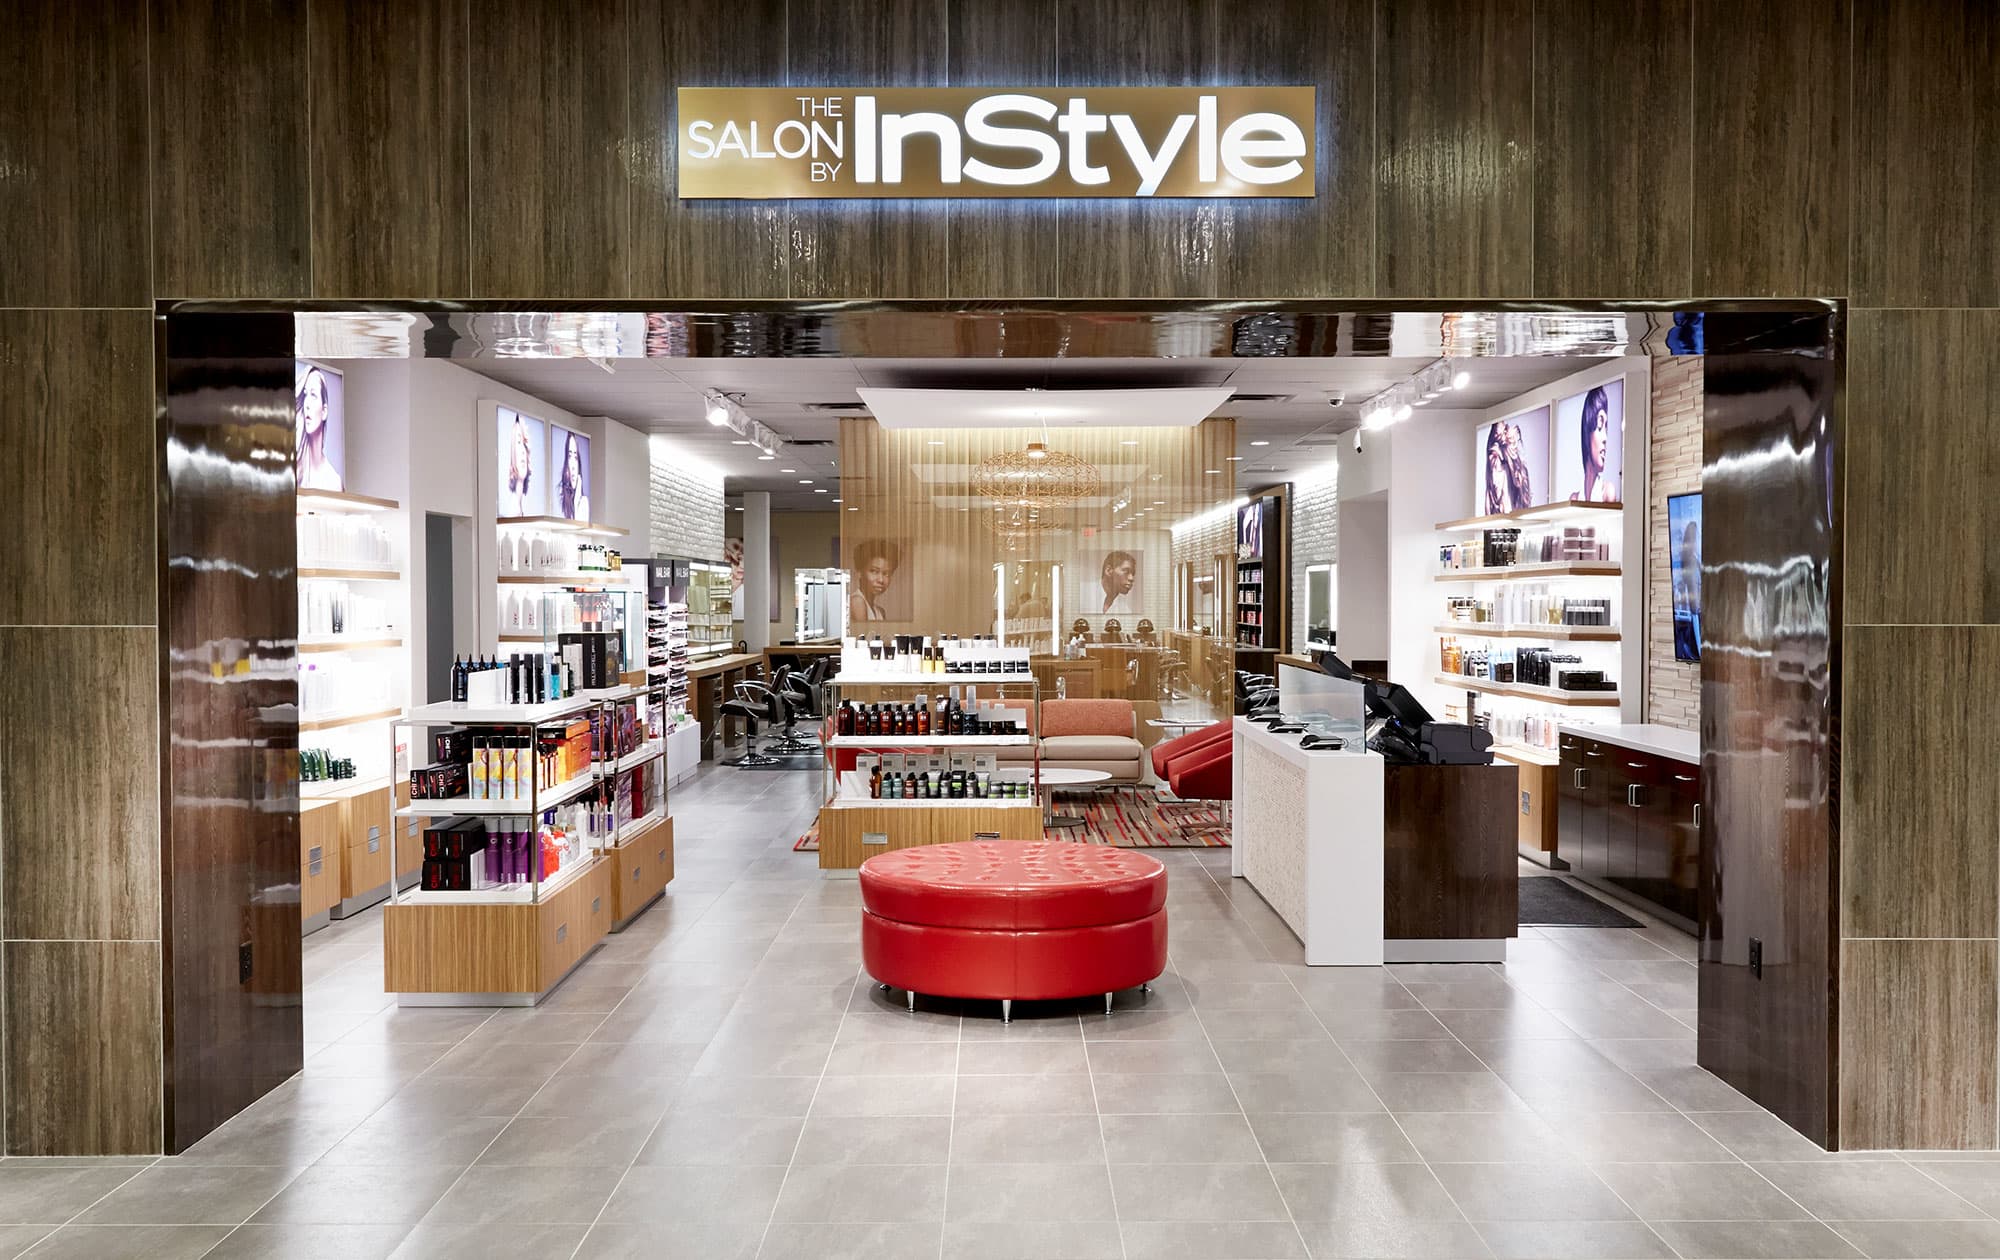 JC Penney is still betting on beauty to fuel its turnaround